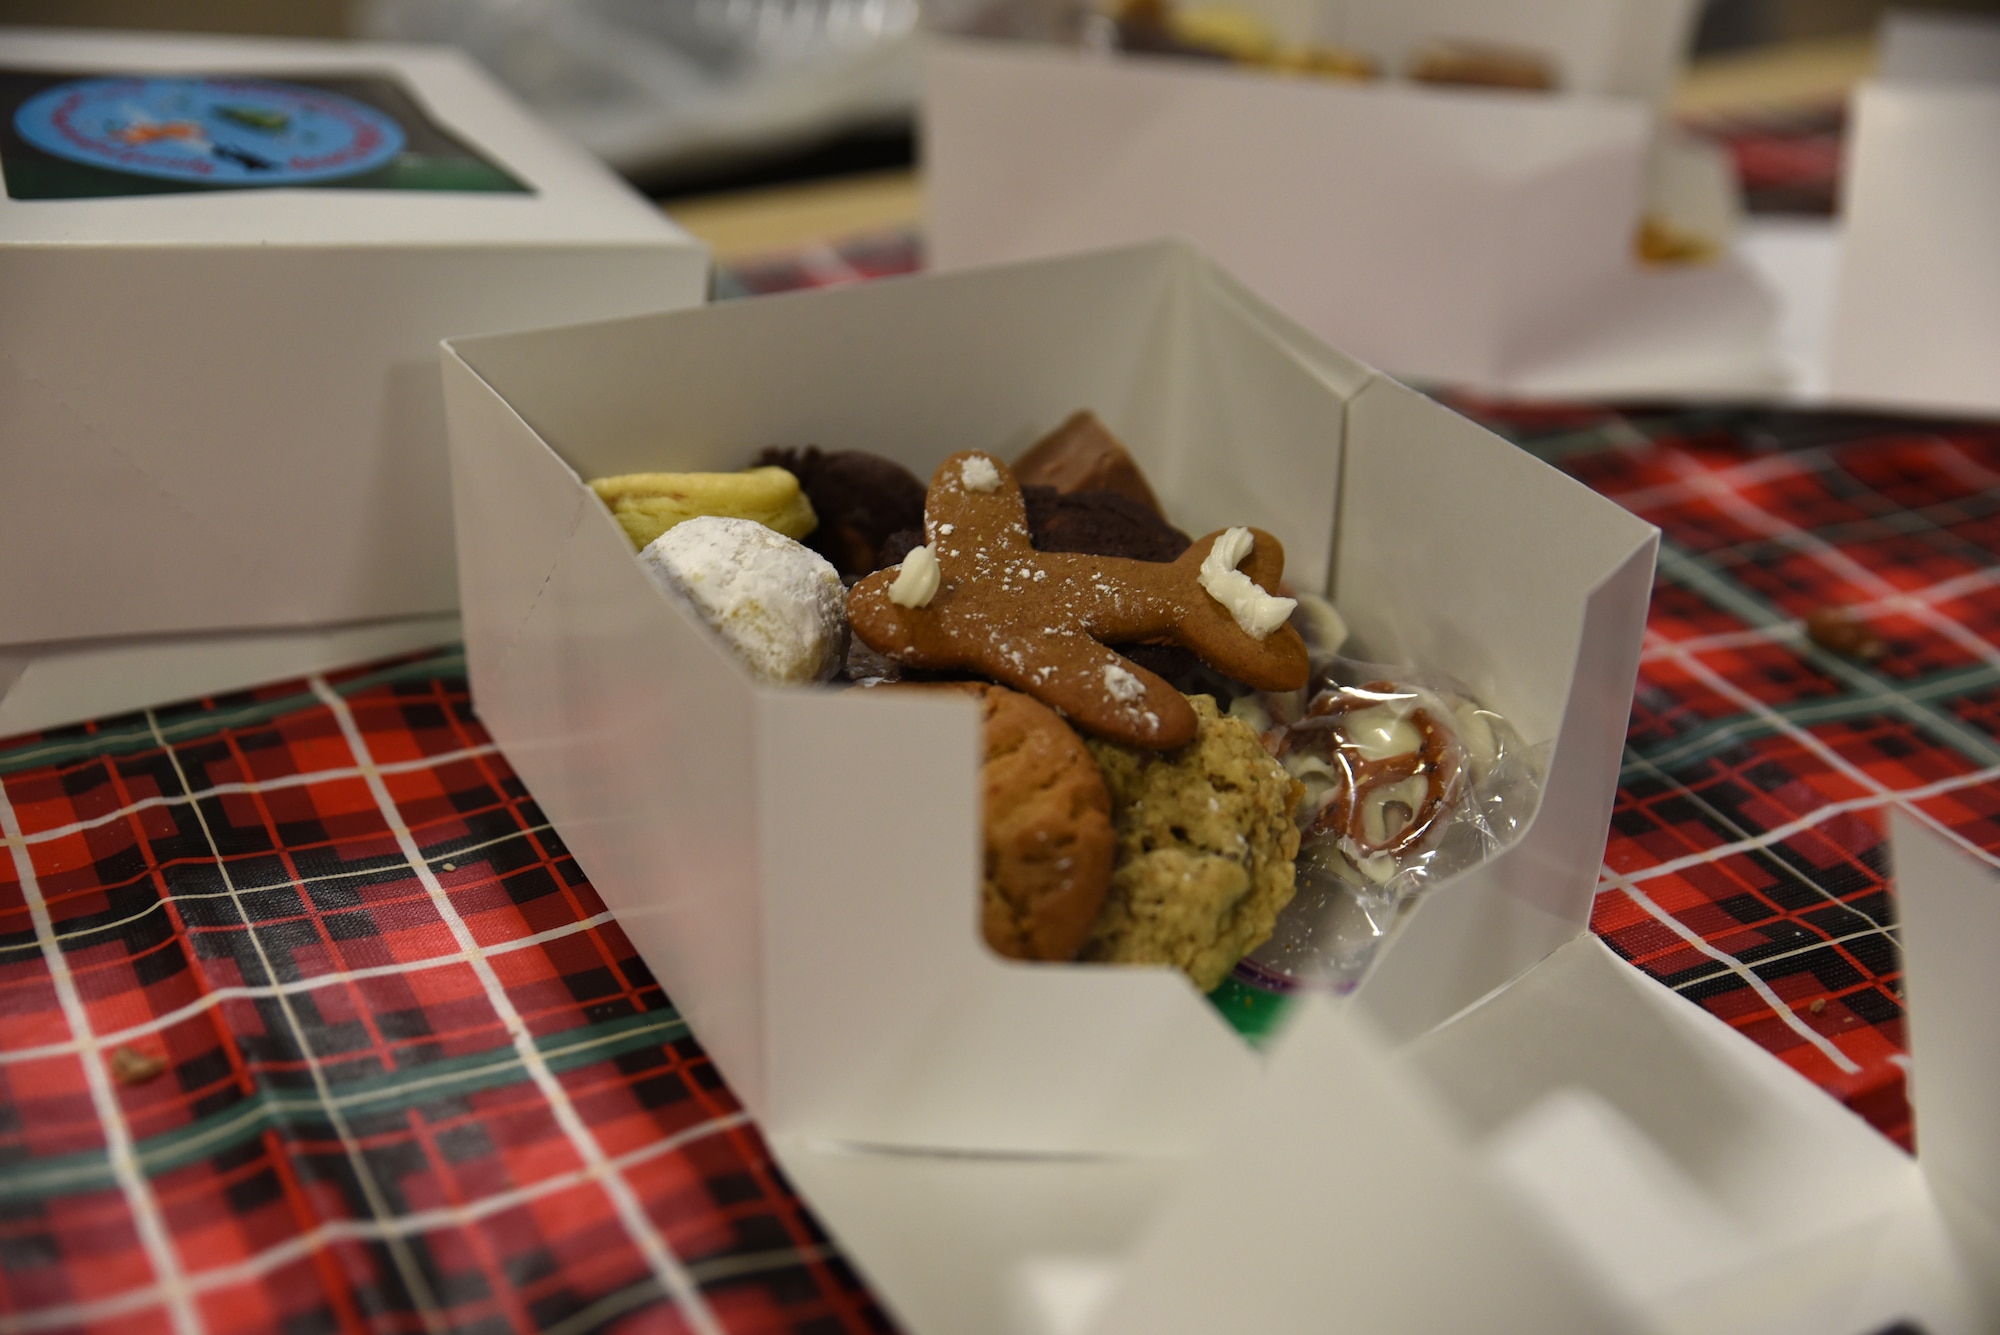 The Team McChord community donated homemade cookies for Operation Cookie Drop at Joint Base Lewis-McChord, Washington, Dec. 14, 2022. Over 700 single Airmen received cookies during Operation Cookie Drop this year. (U.S. Air Force photo by Airman Kylee Tyus)